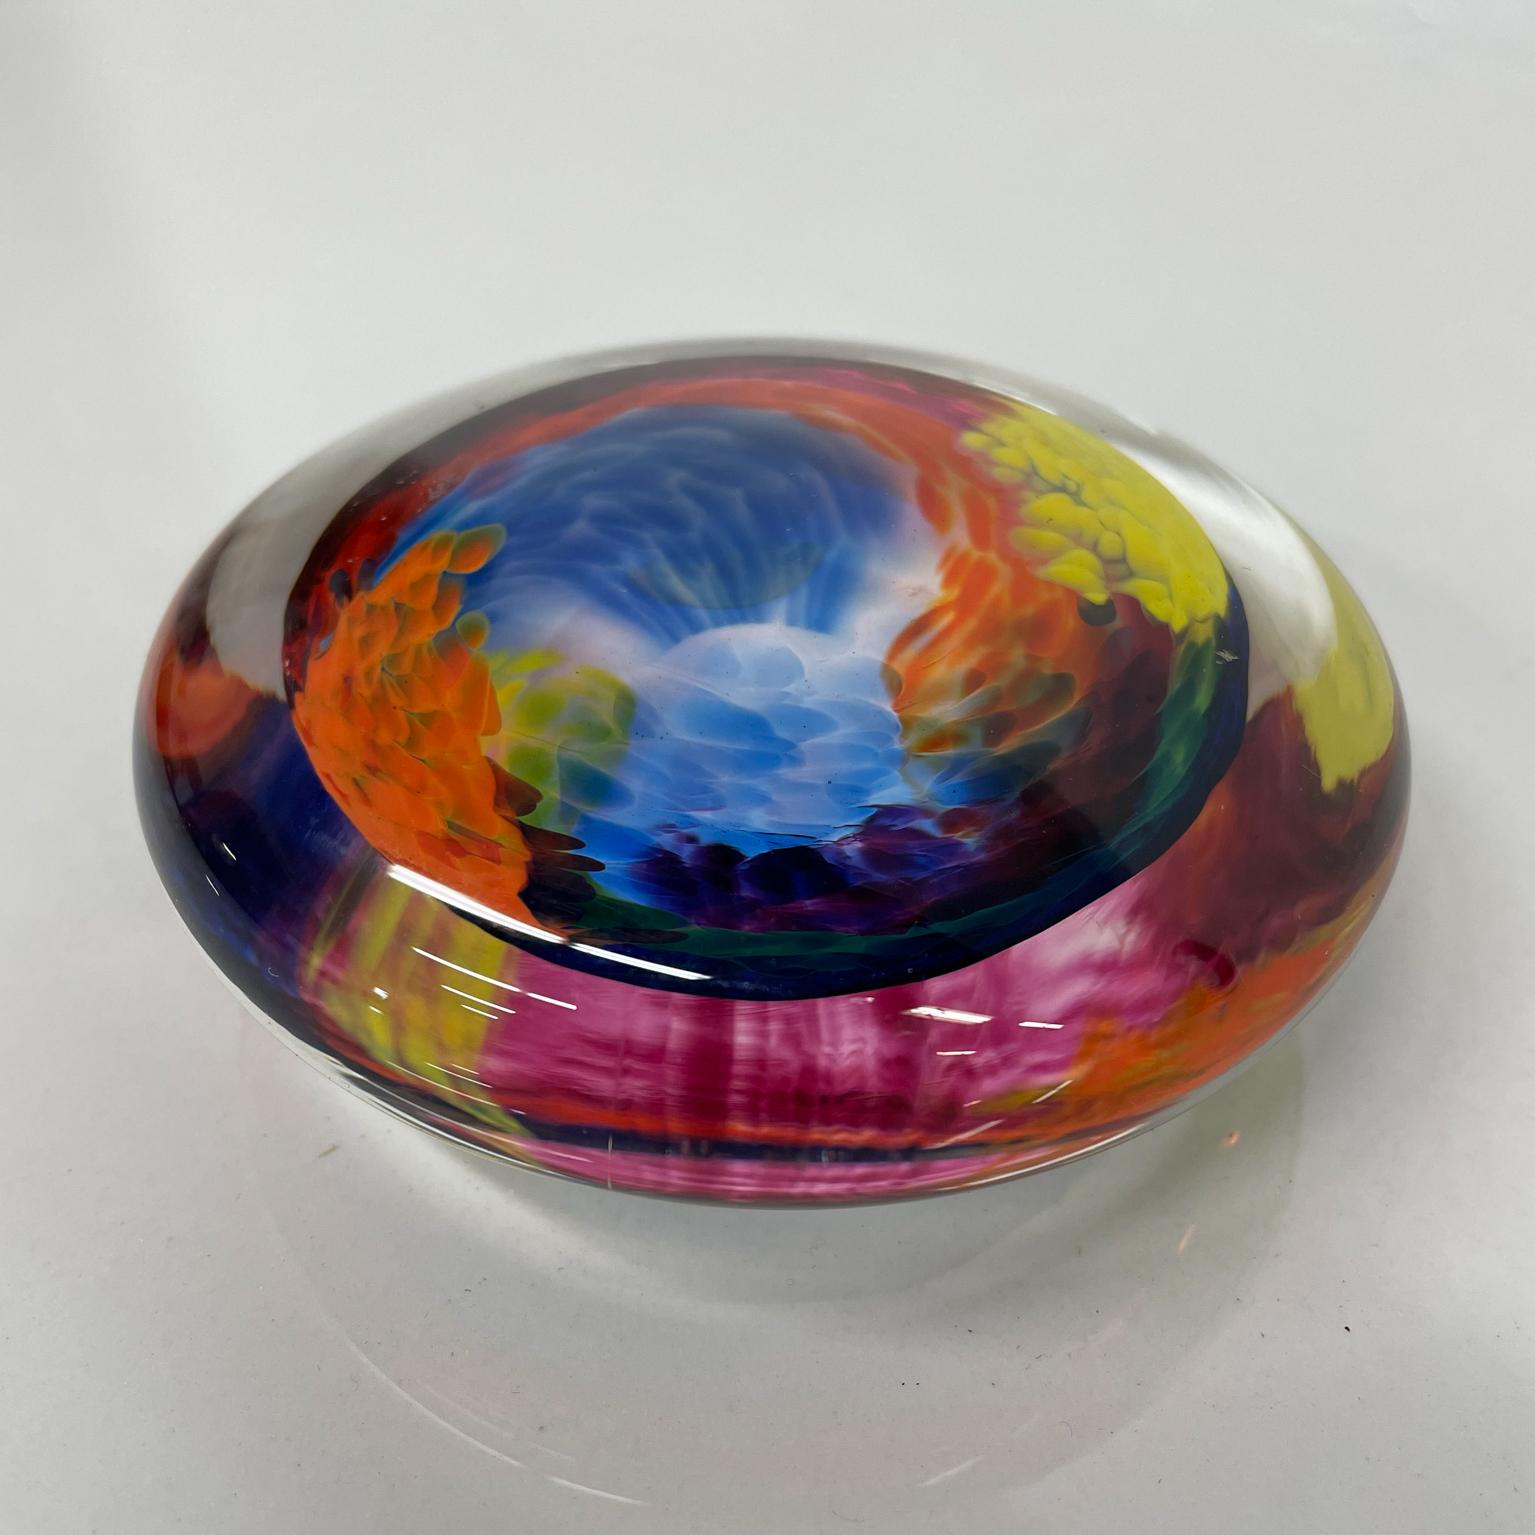 Paperweight
Vintage art glass vibrant sea of color paperweight
No signature. Style of Murano.
Measures: 3.88 diameter x 1.5
Preowned vintage original good condition. Polished flat surface at bottom.
Refer to images.
     